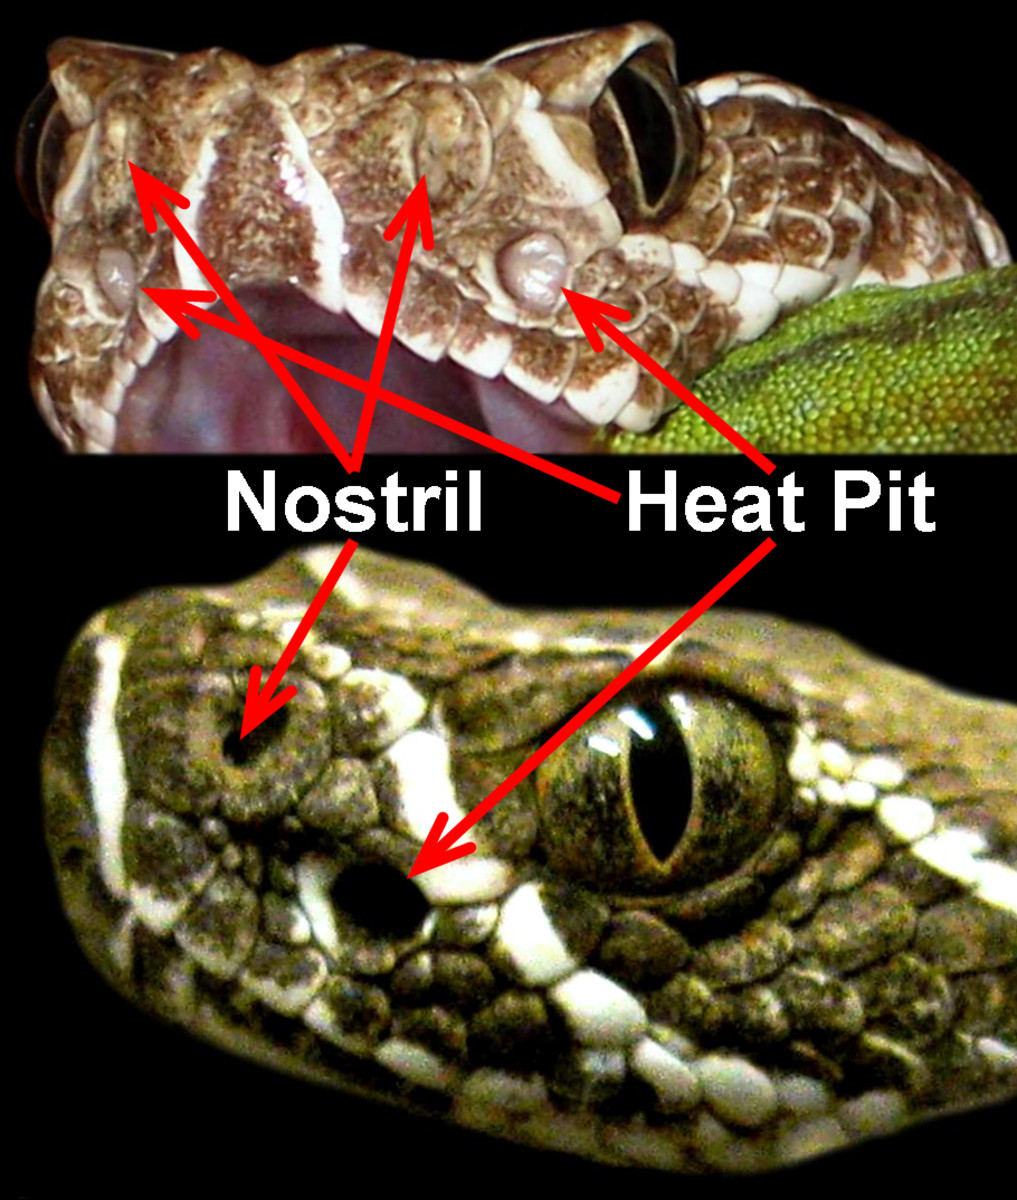 A front-view and a side-view of a Prairie Rattlesnake (Crotalus viridis viridis), showing how the heat-sensing pits face forward and are located in between and below the eyes and nostrils (which open laterally and are hardly visible from the front).